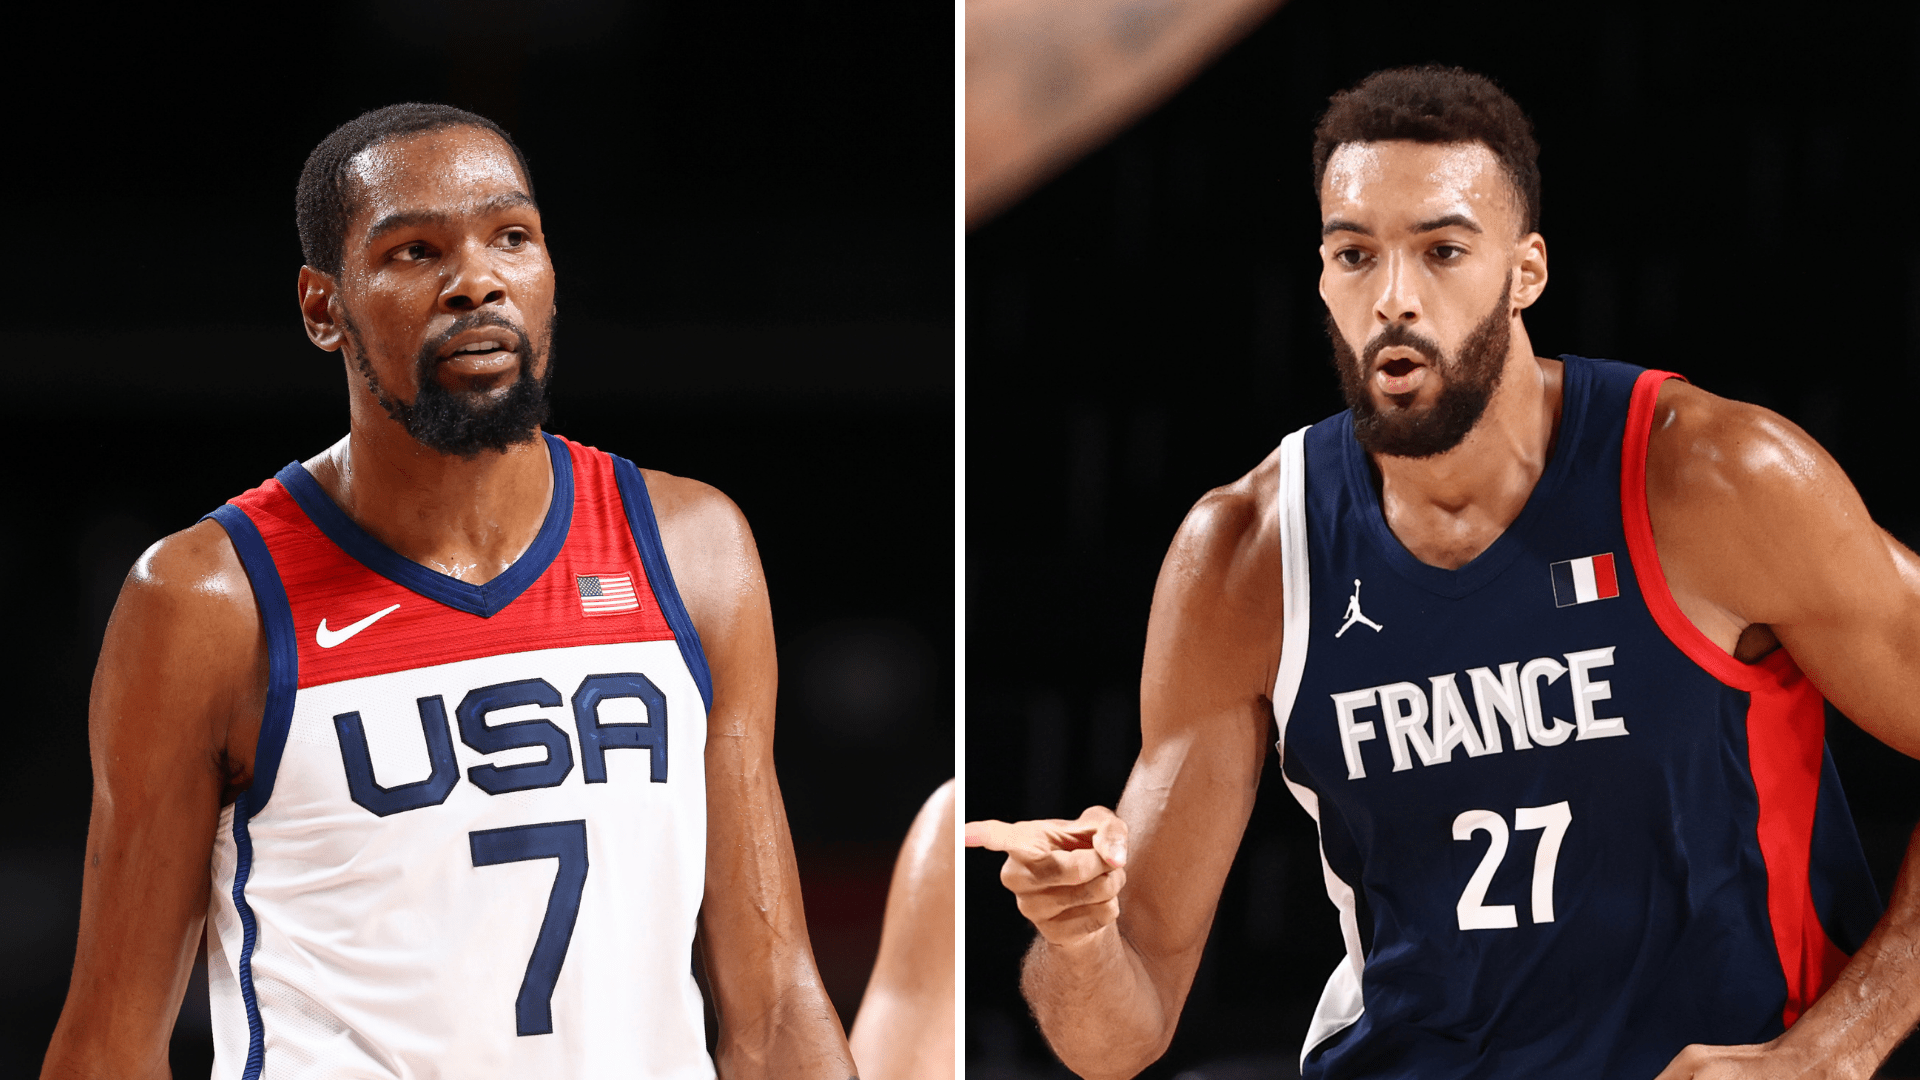 Three stories to follow in the Olympic final between the United States vs. Tokyo 2020 France | NBA.com Spain | The Official Site of the NBA